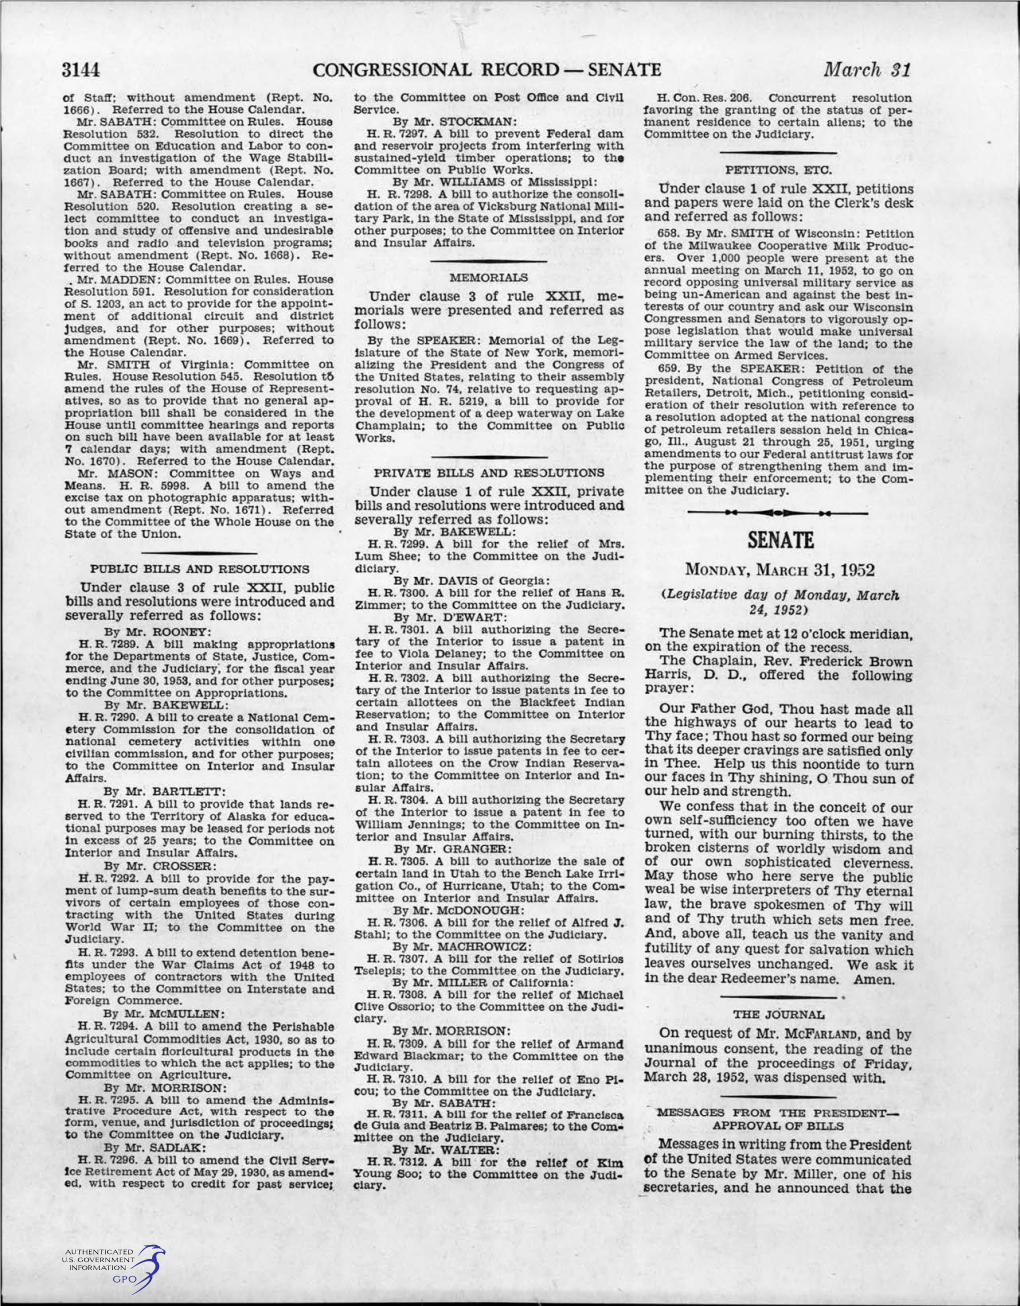 CONGRESSIONAL RECORD - SENATE March 31 of Staff; Without Amendment (Rept